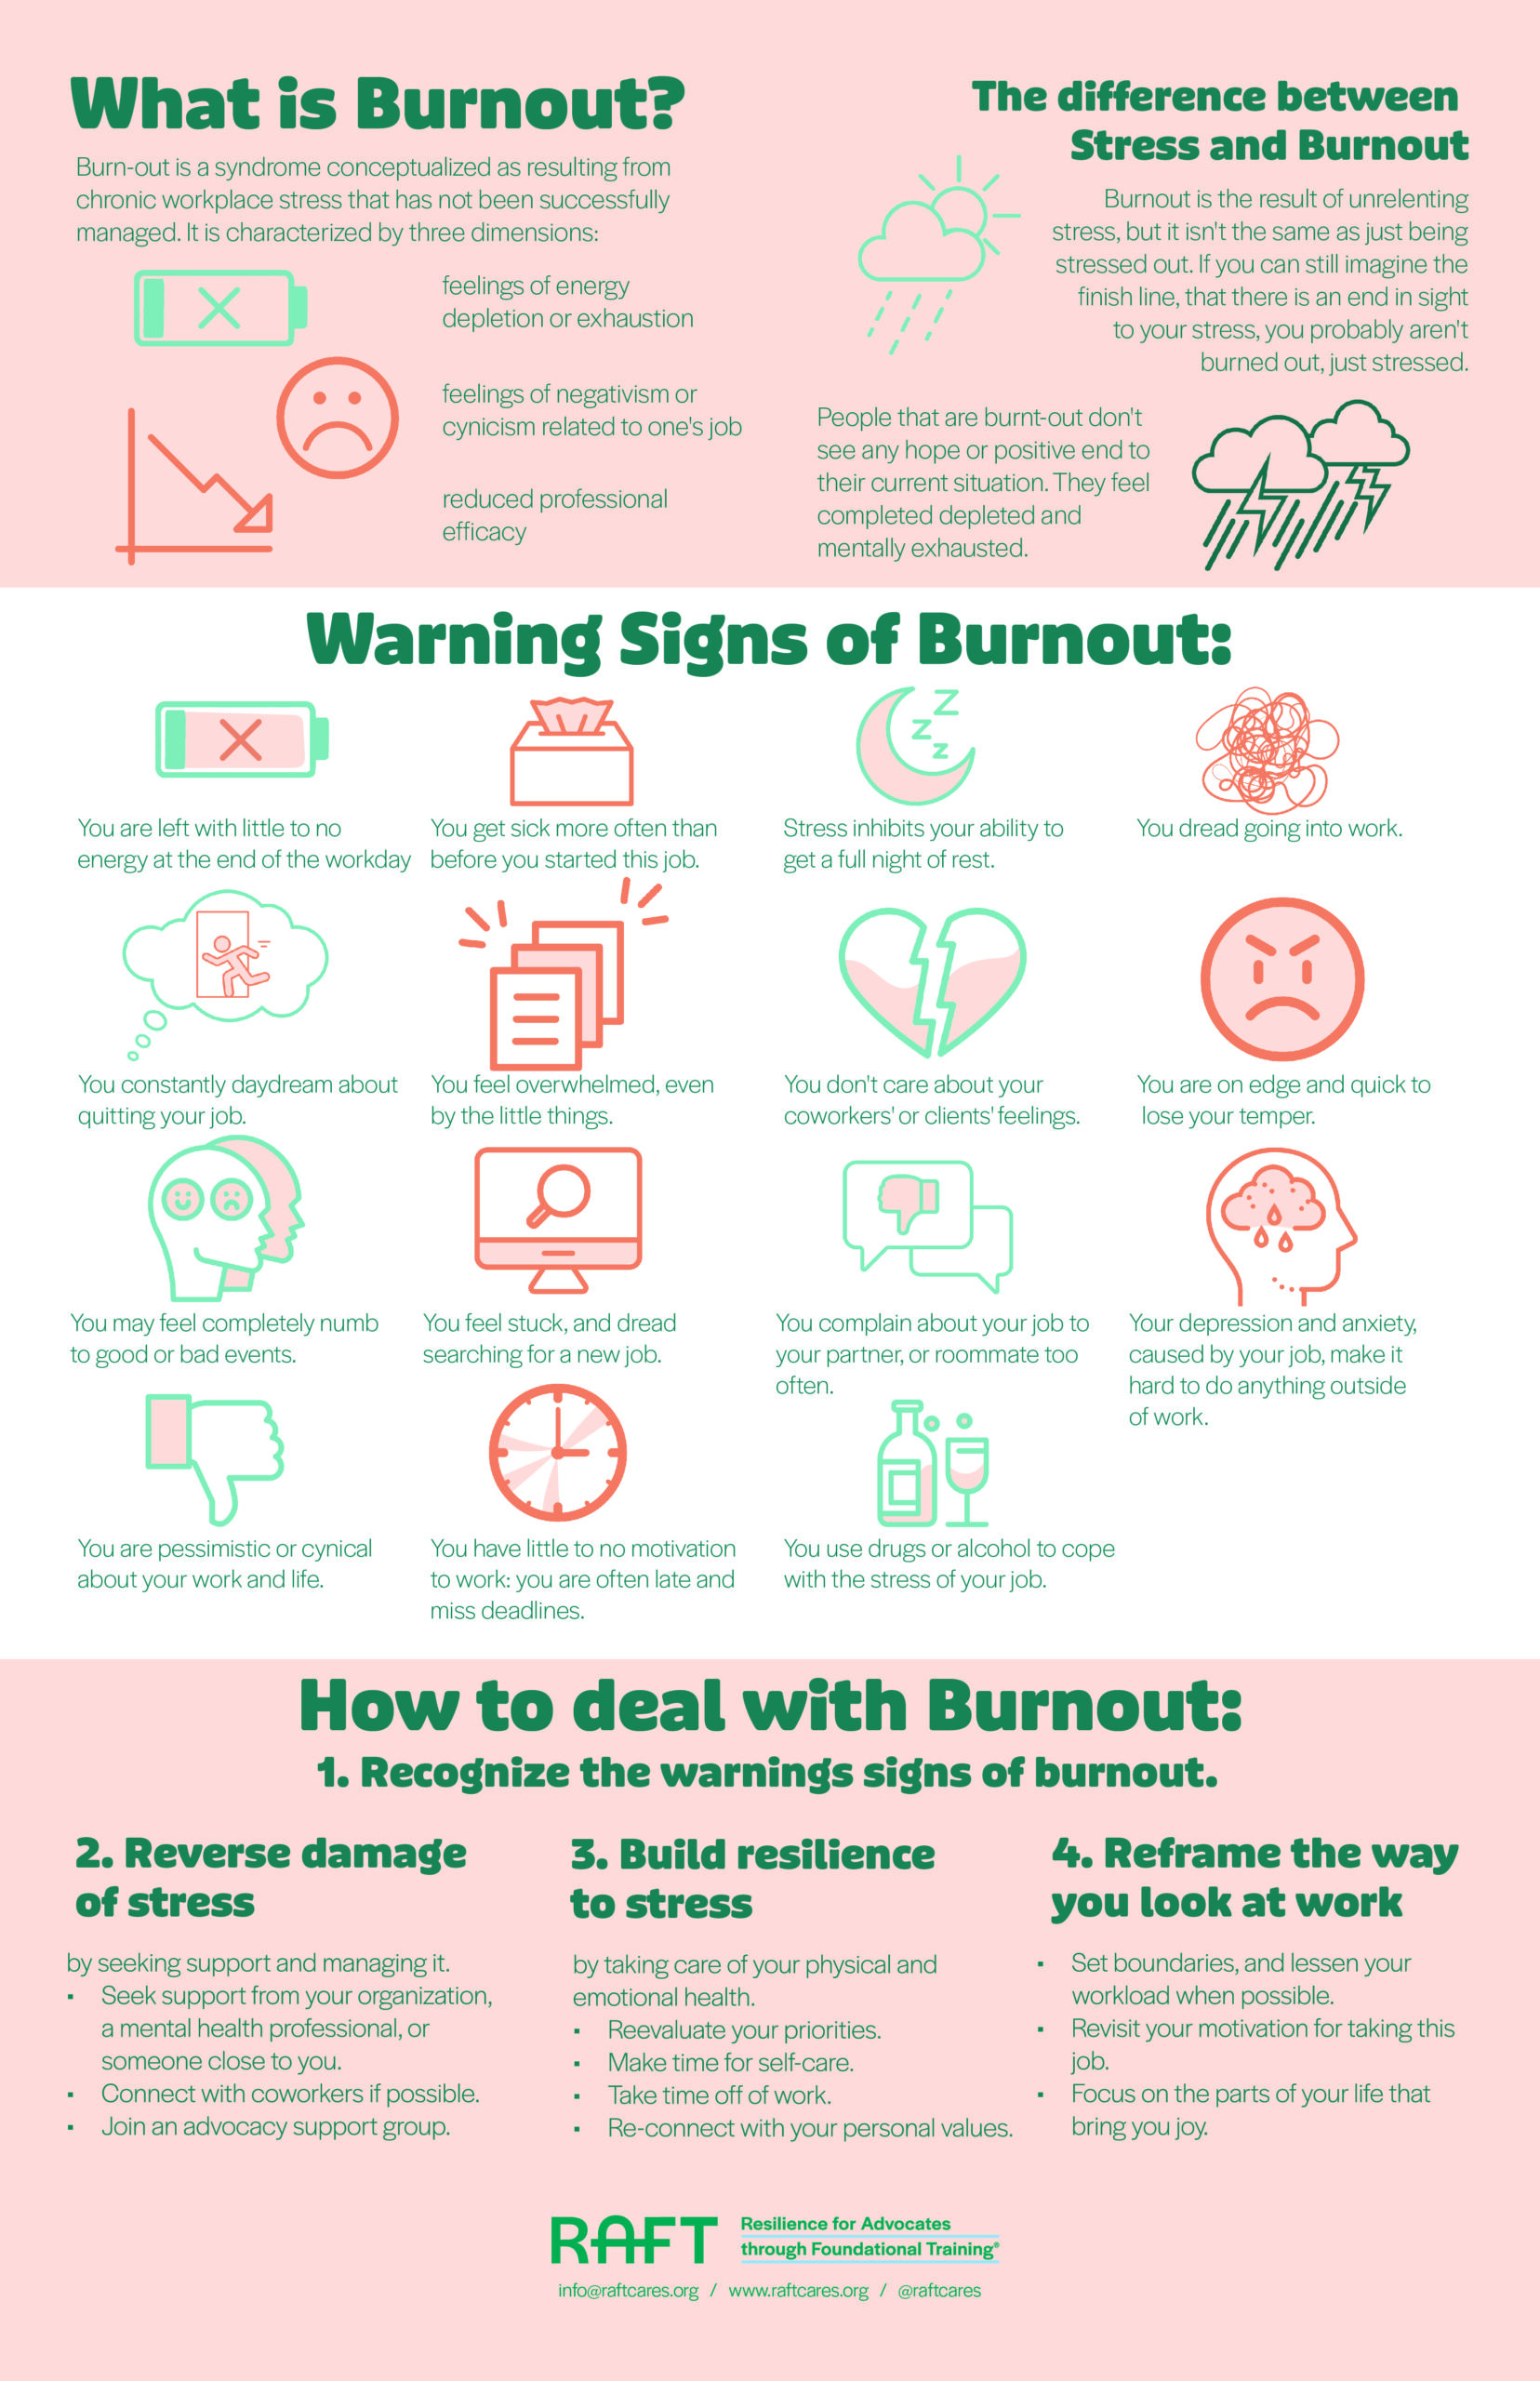 Warning Signs of Burnout Poster